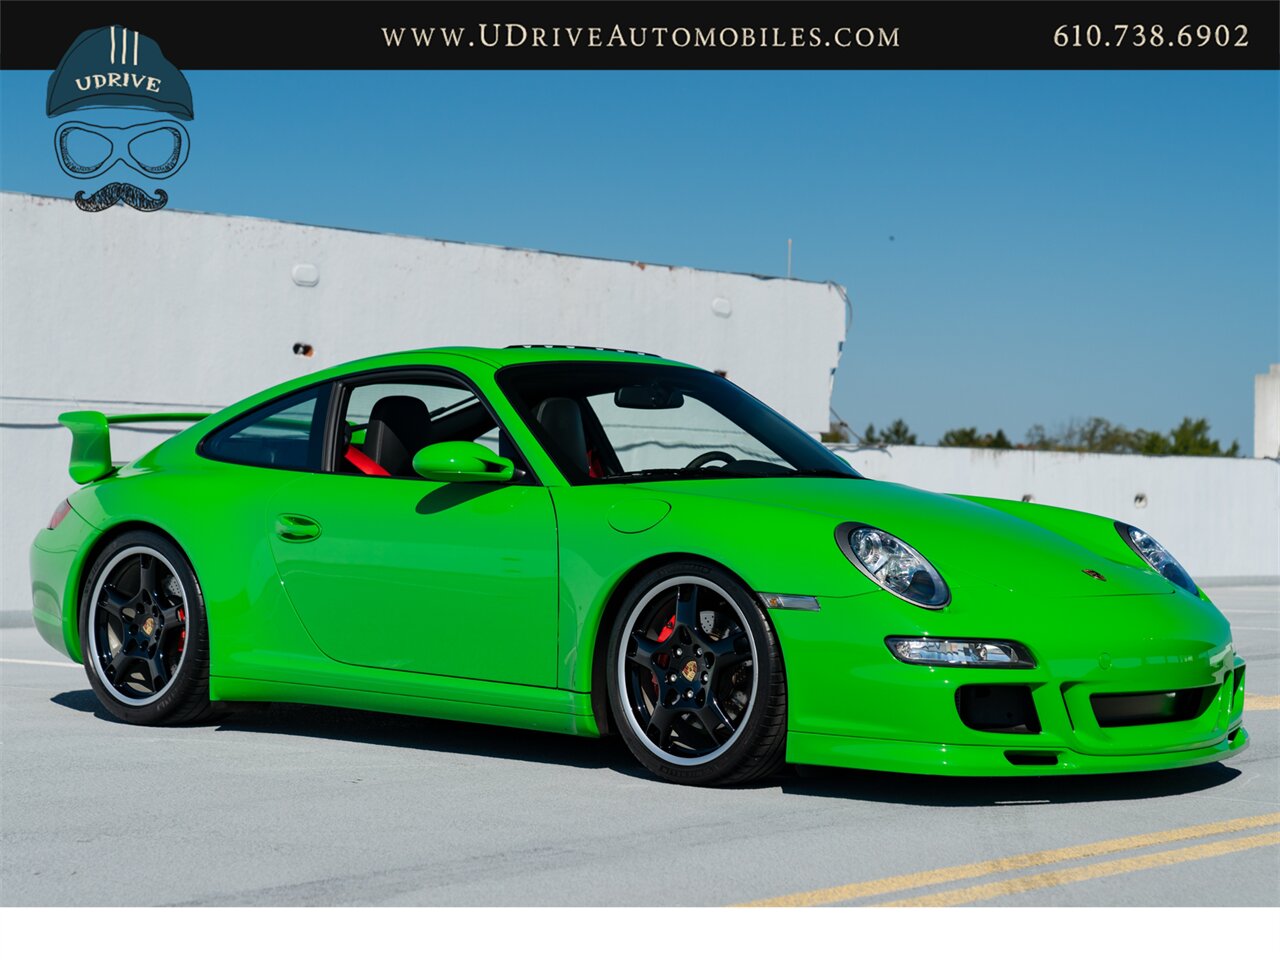 2006 Porsche 911 Carrera 4S  997 PTS Signal Green 6Sp Sport Sts Spt Chrono Spt Exhst - Photo 16 - West Chester, PA 19382